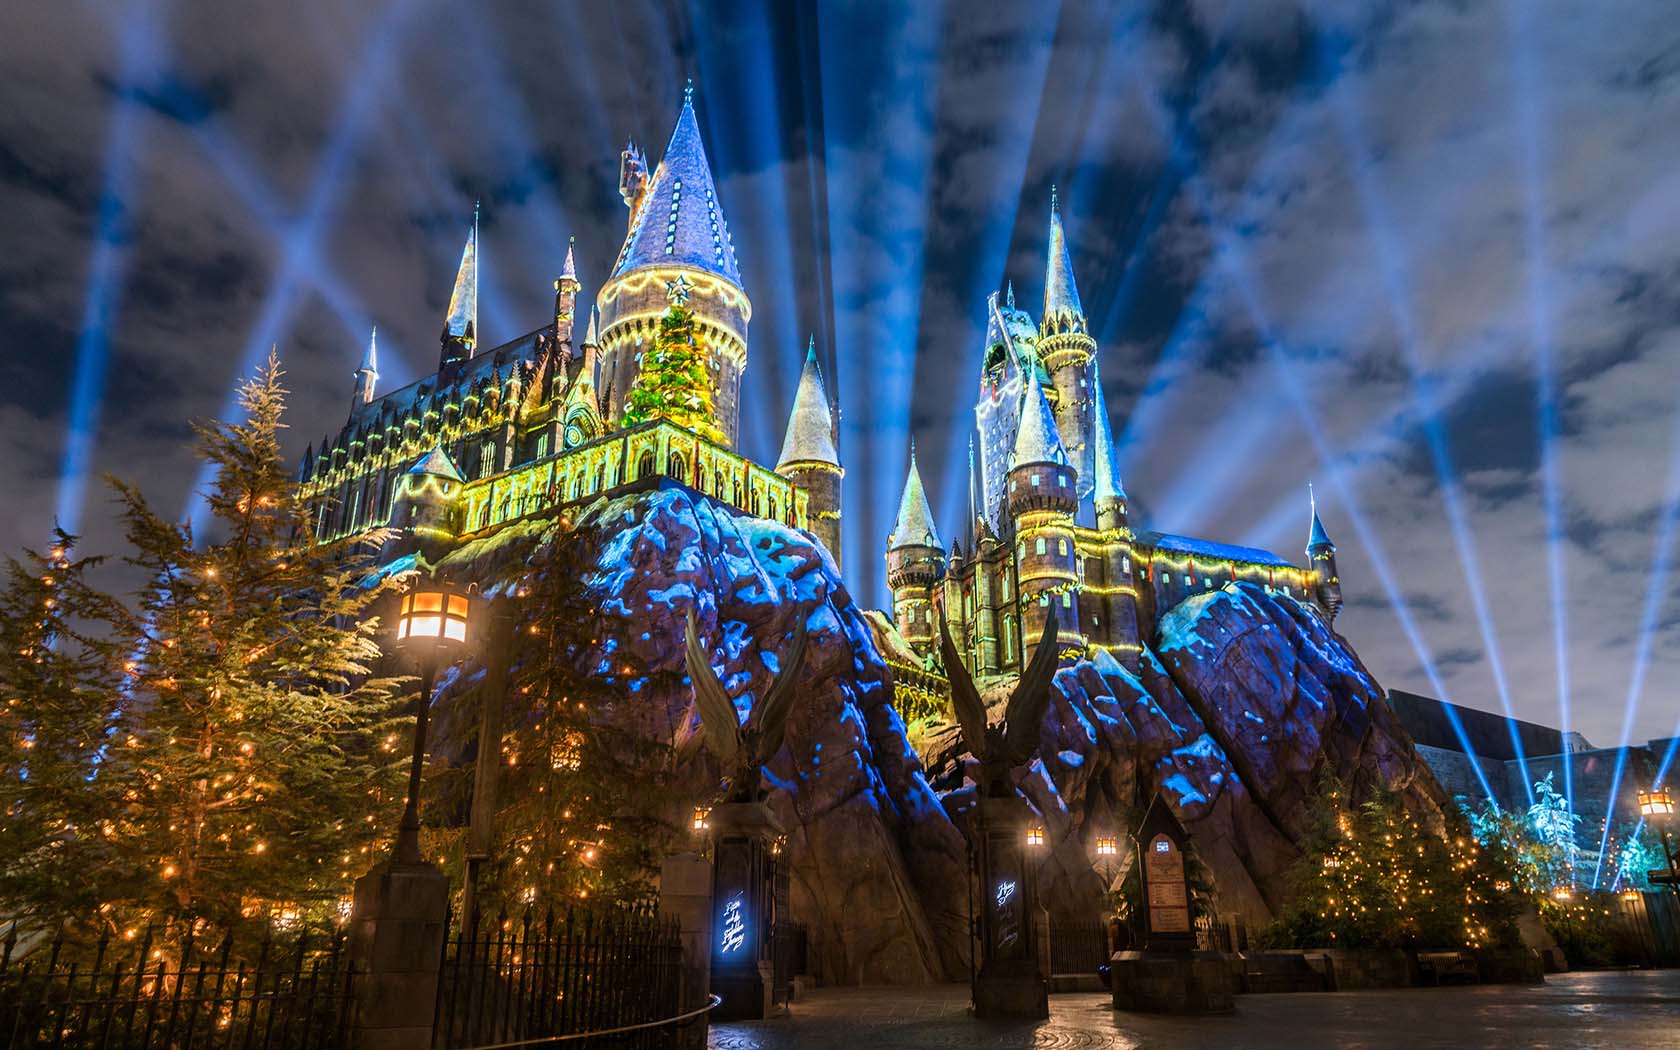 The Magic of Hogwarts Castle at the Wizarding World of Harry Potter, Orlando, Florida